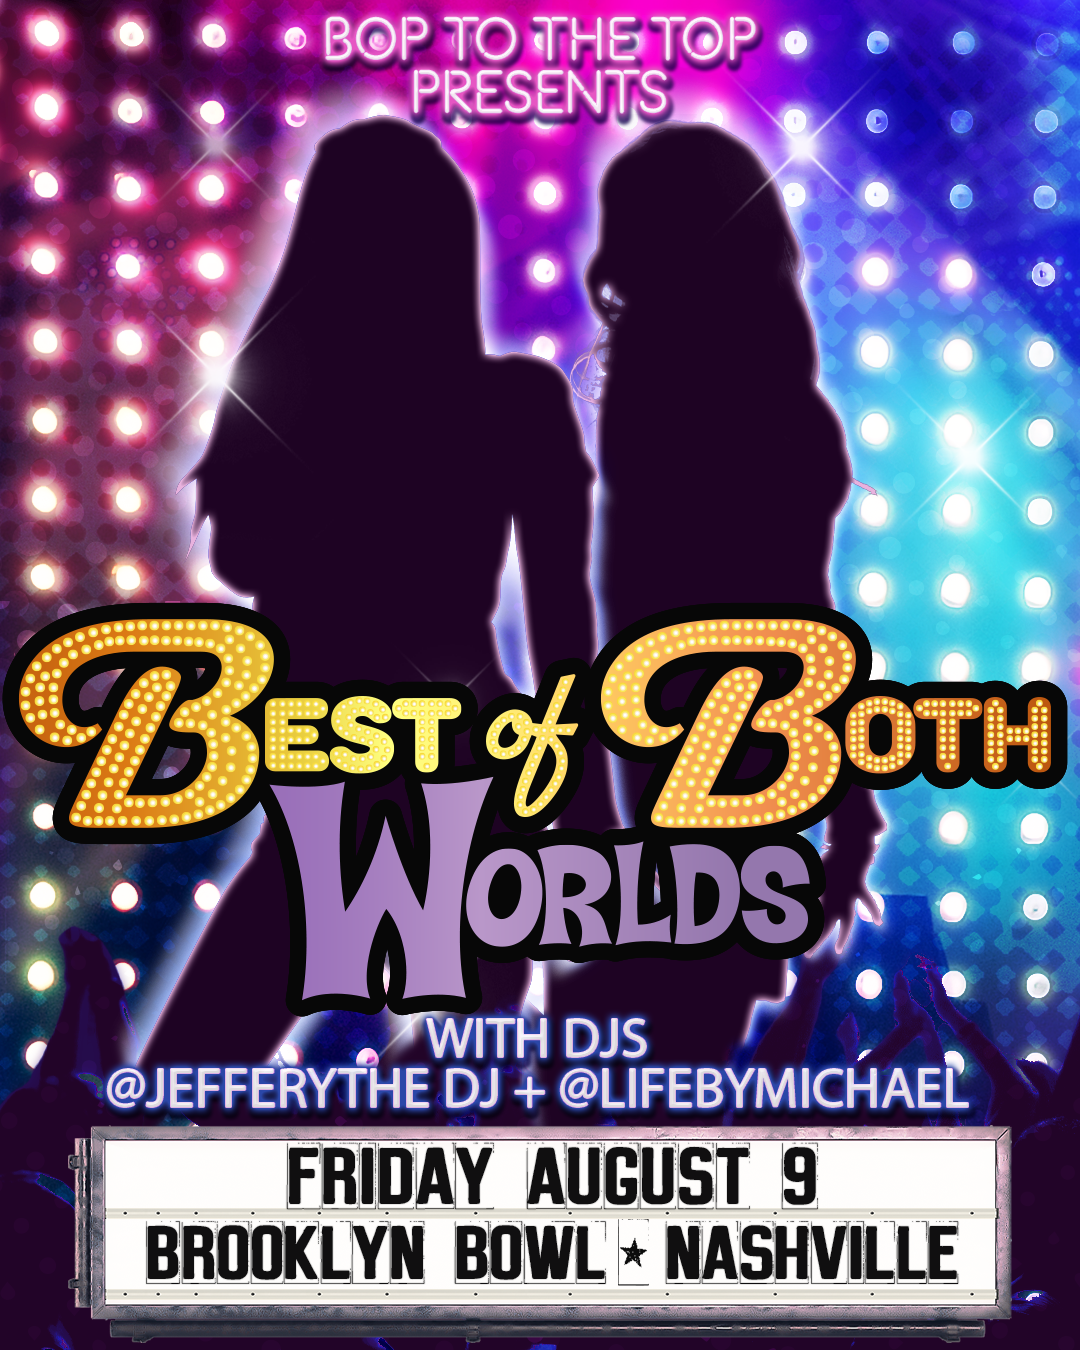 Bop to the Top Presents: Best of Both Worlds